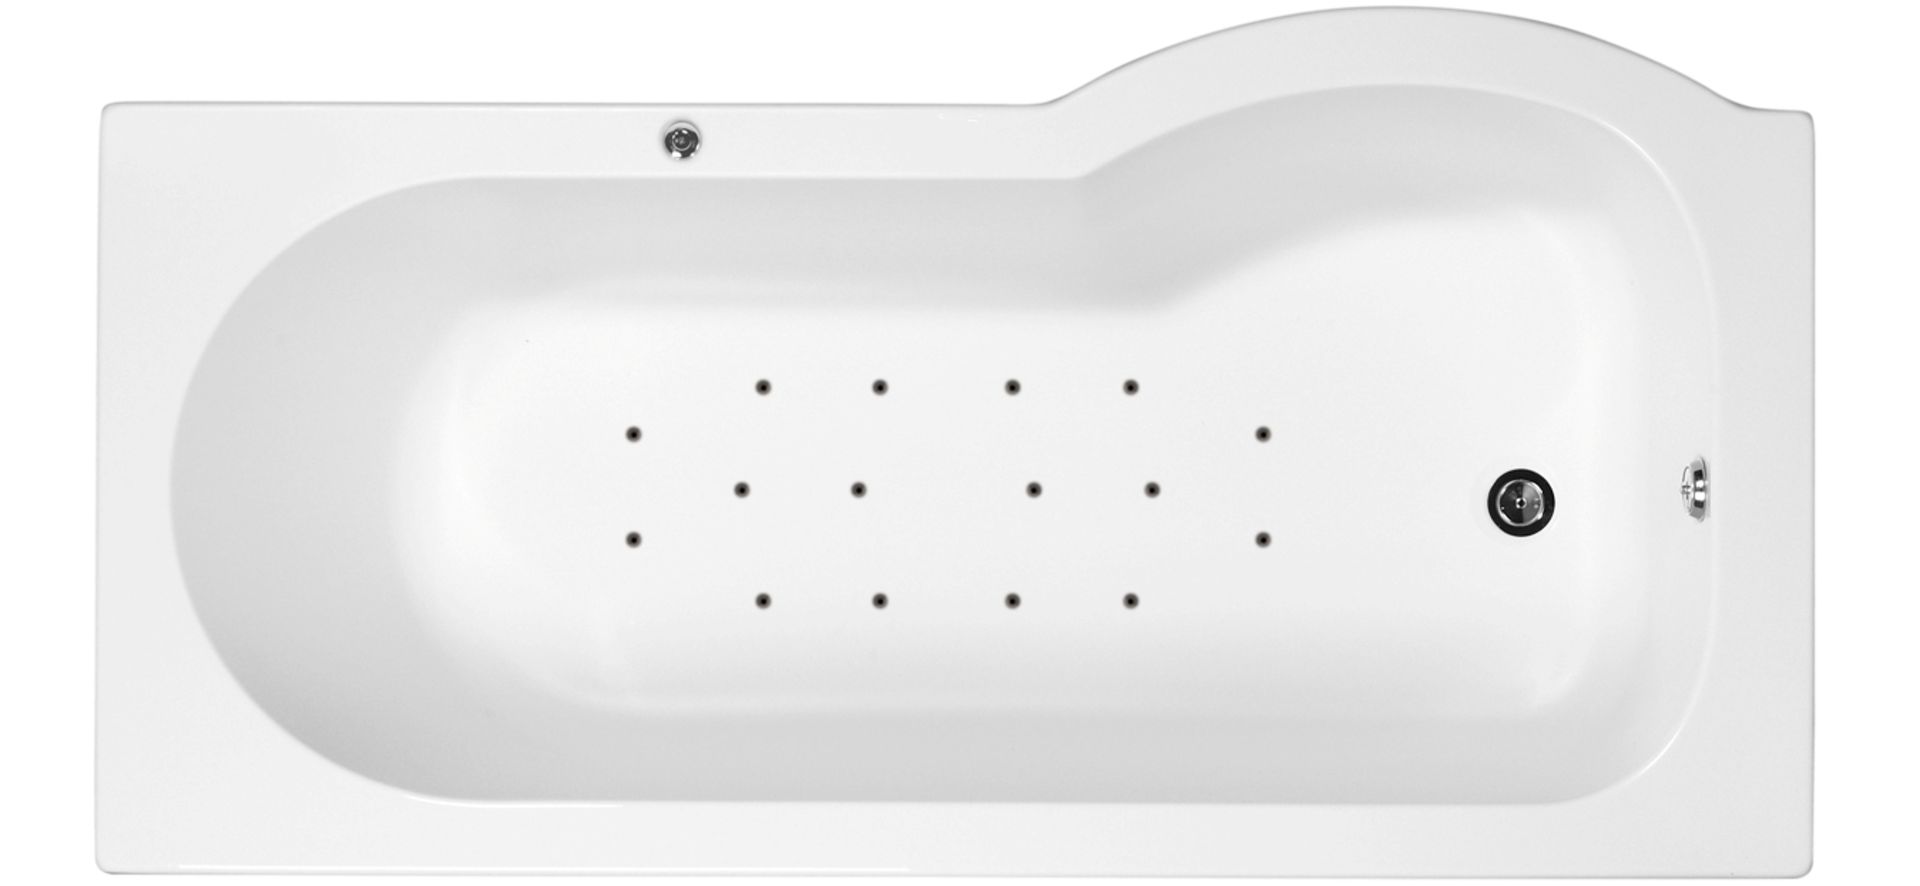 1500 x 850 x750  P shower air SPA BATH with 12 jets (in factory wrap) (includes pump)